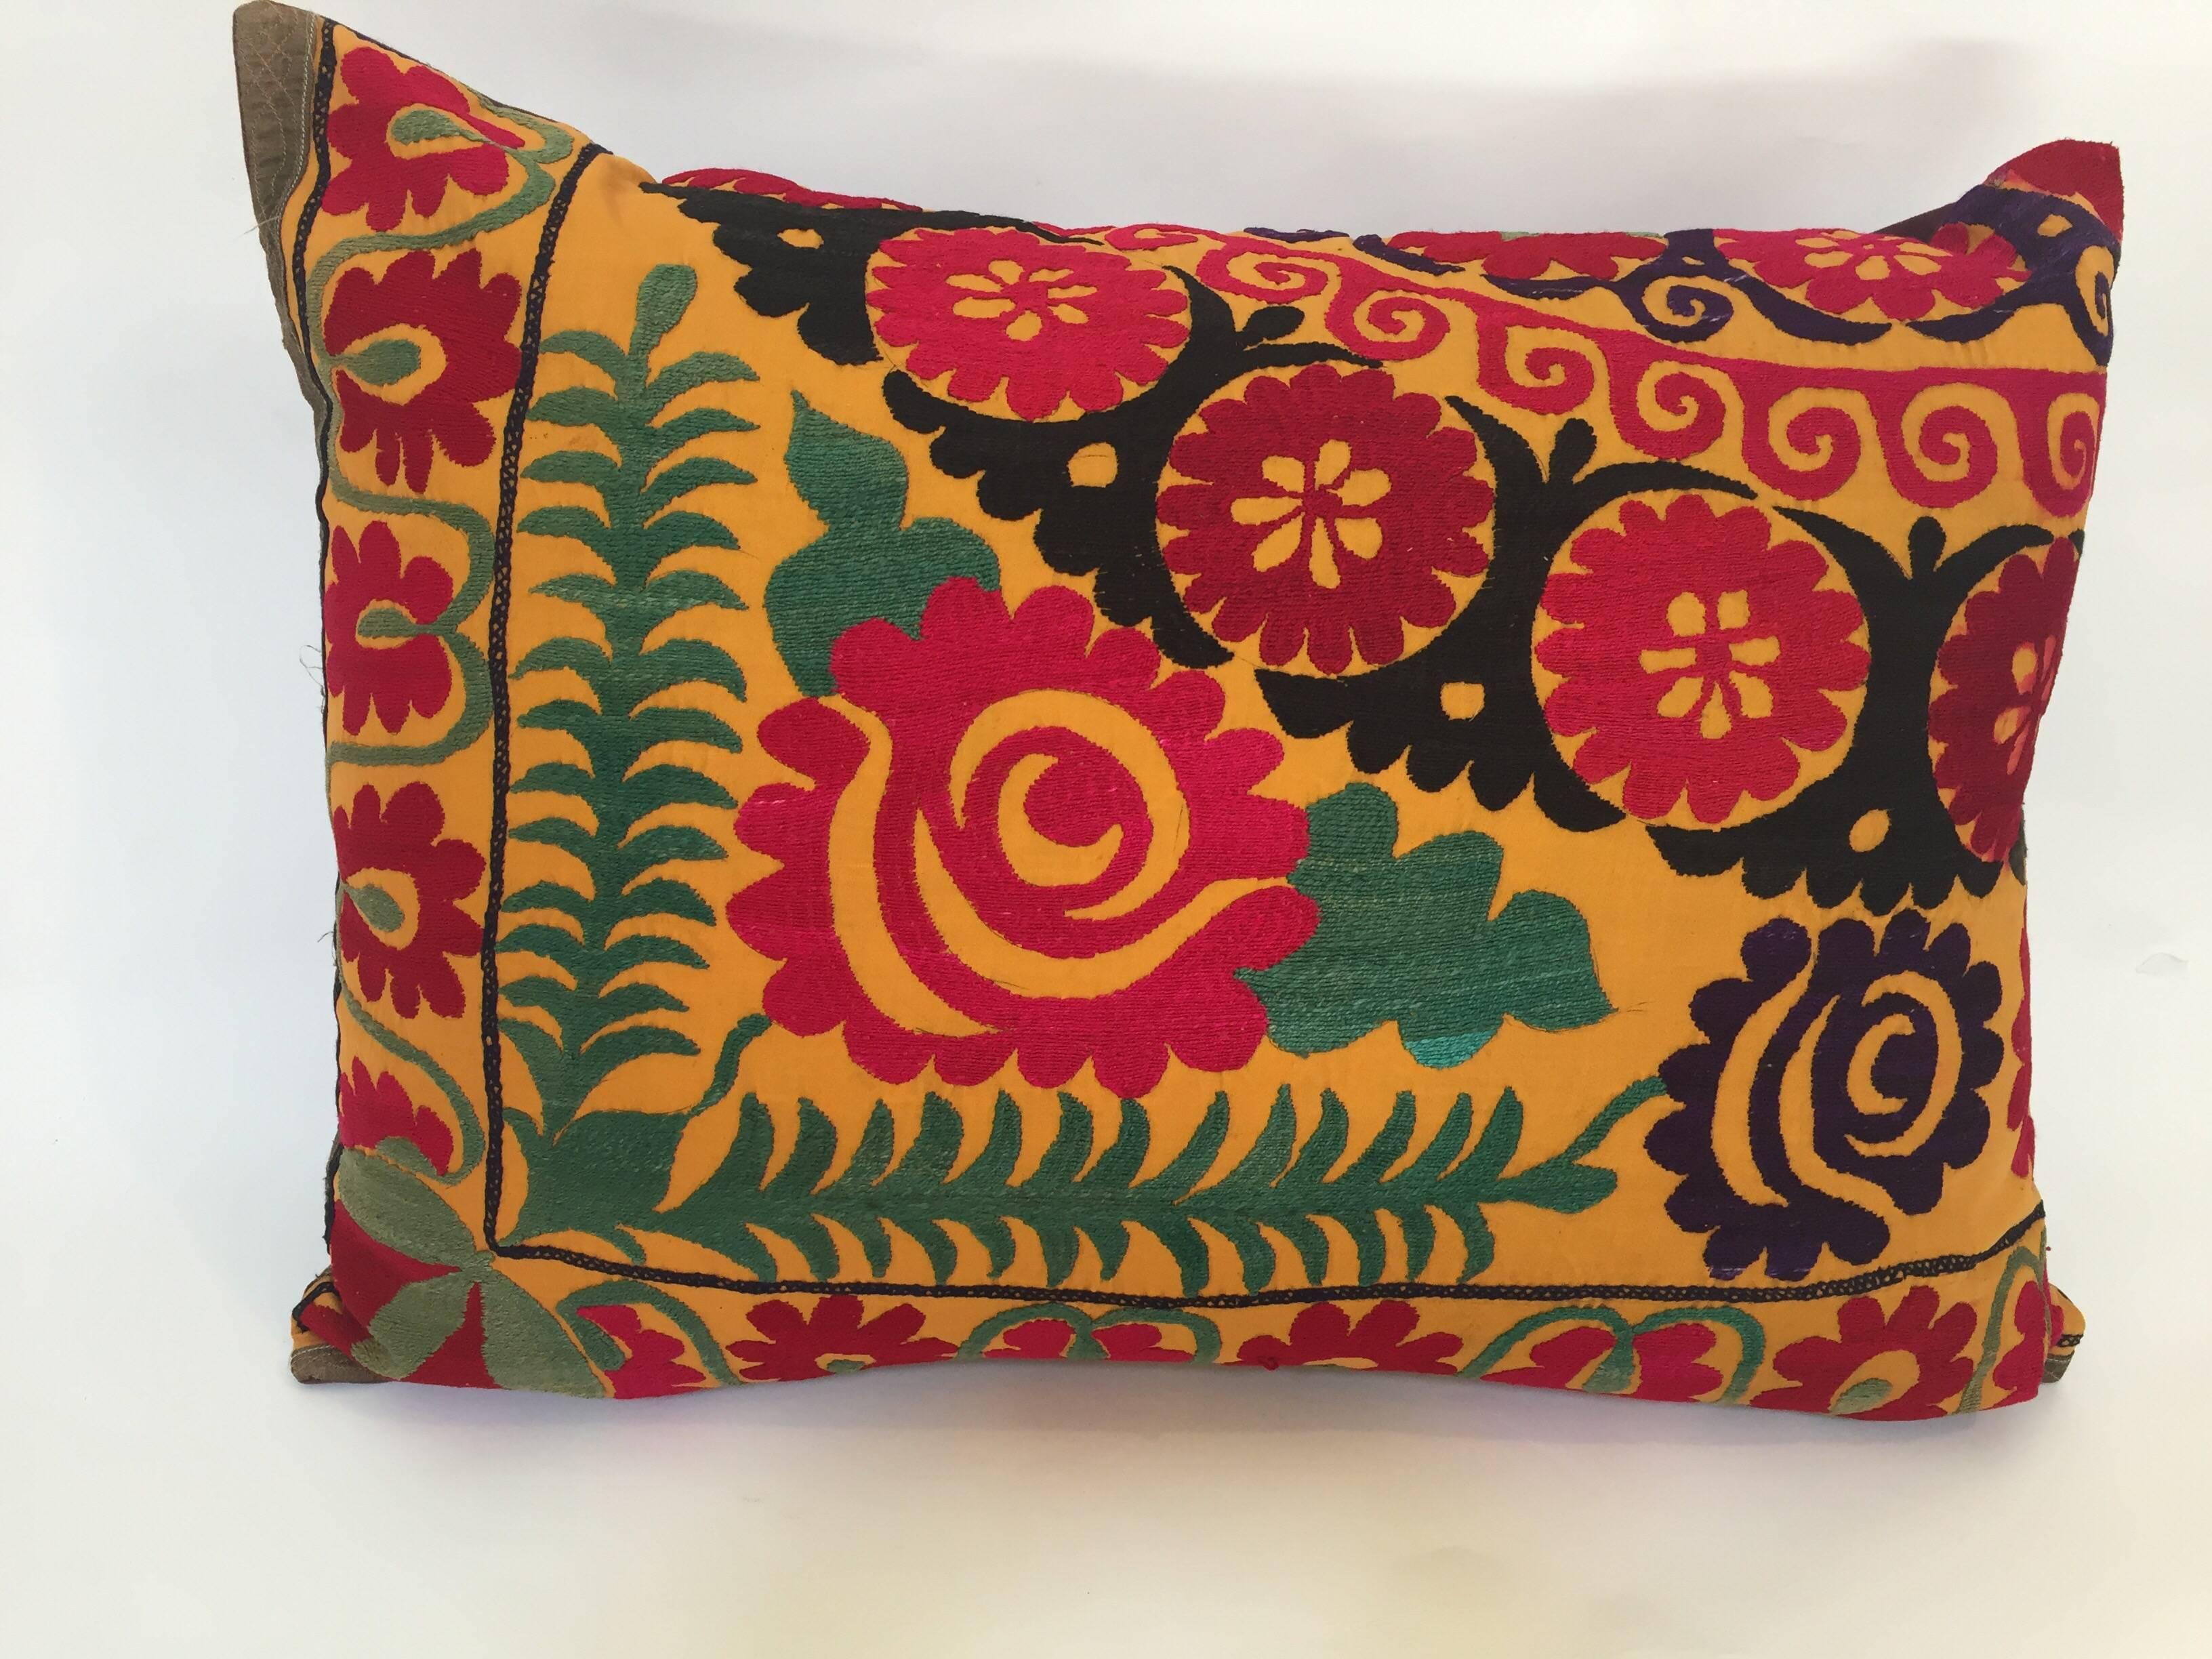 Large vintage colorful Suzani embroidery lumbar pillow red with colorful threads. 
A reddish embroidered pillow with flower motifs in shades of black, red, yellow, white, green, magenta, with linen backing and zipper in the back. 
The pillow is made